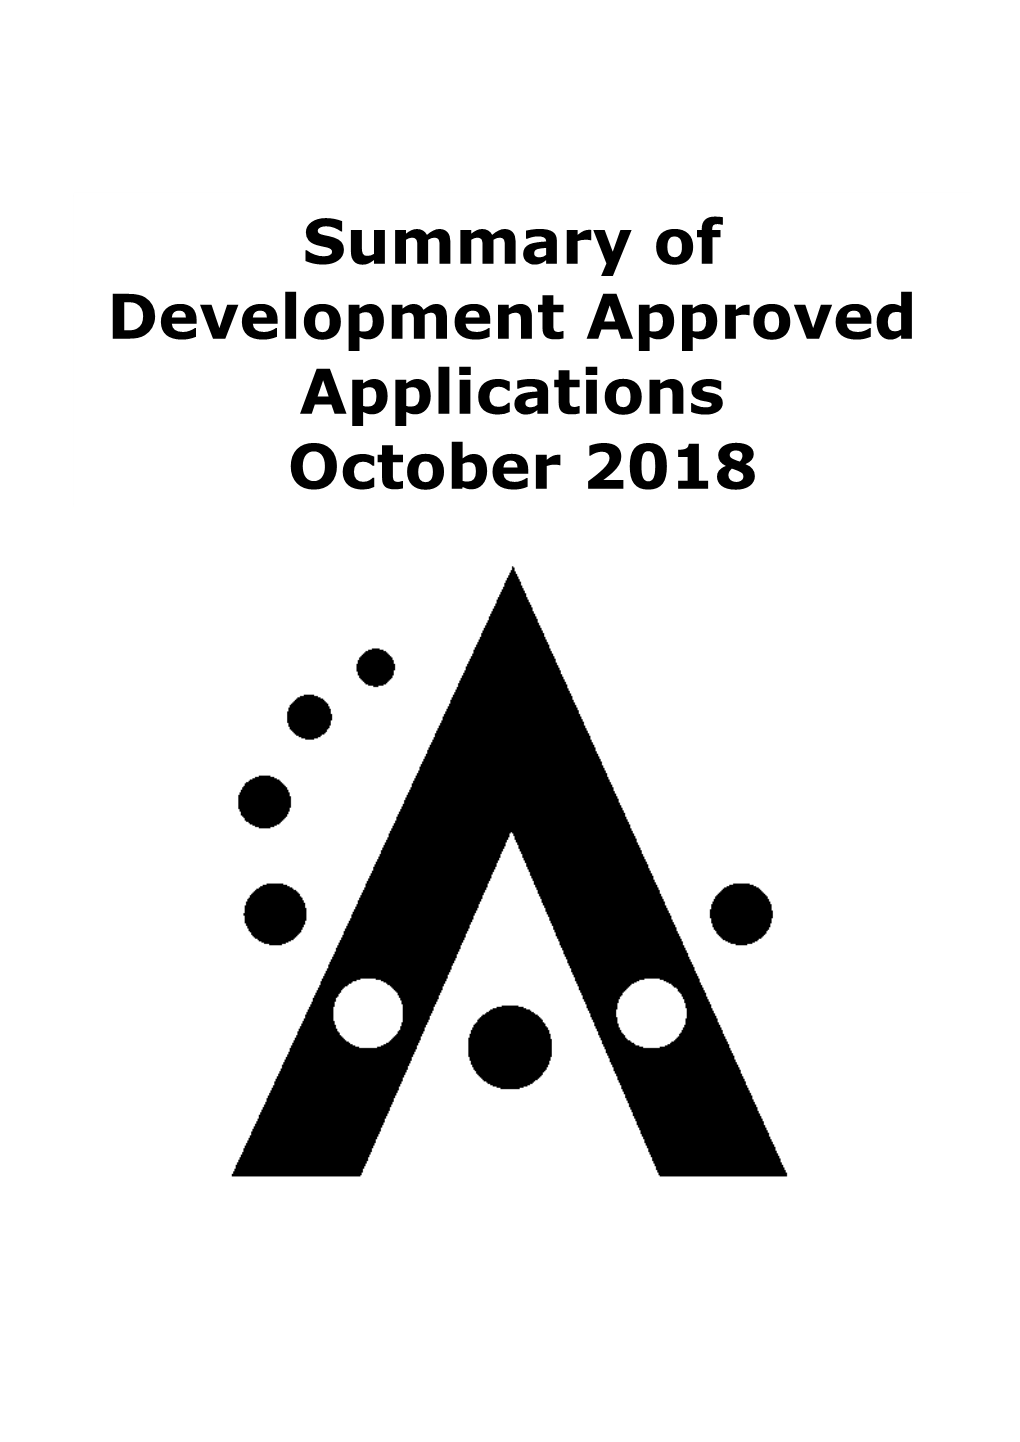 Summary of Development Approved Applications October 2018 Summary of Development Approved Applications October 2018